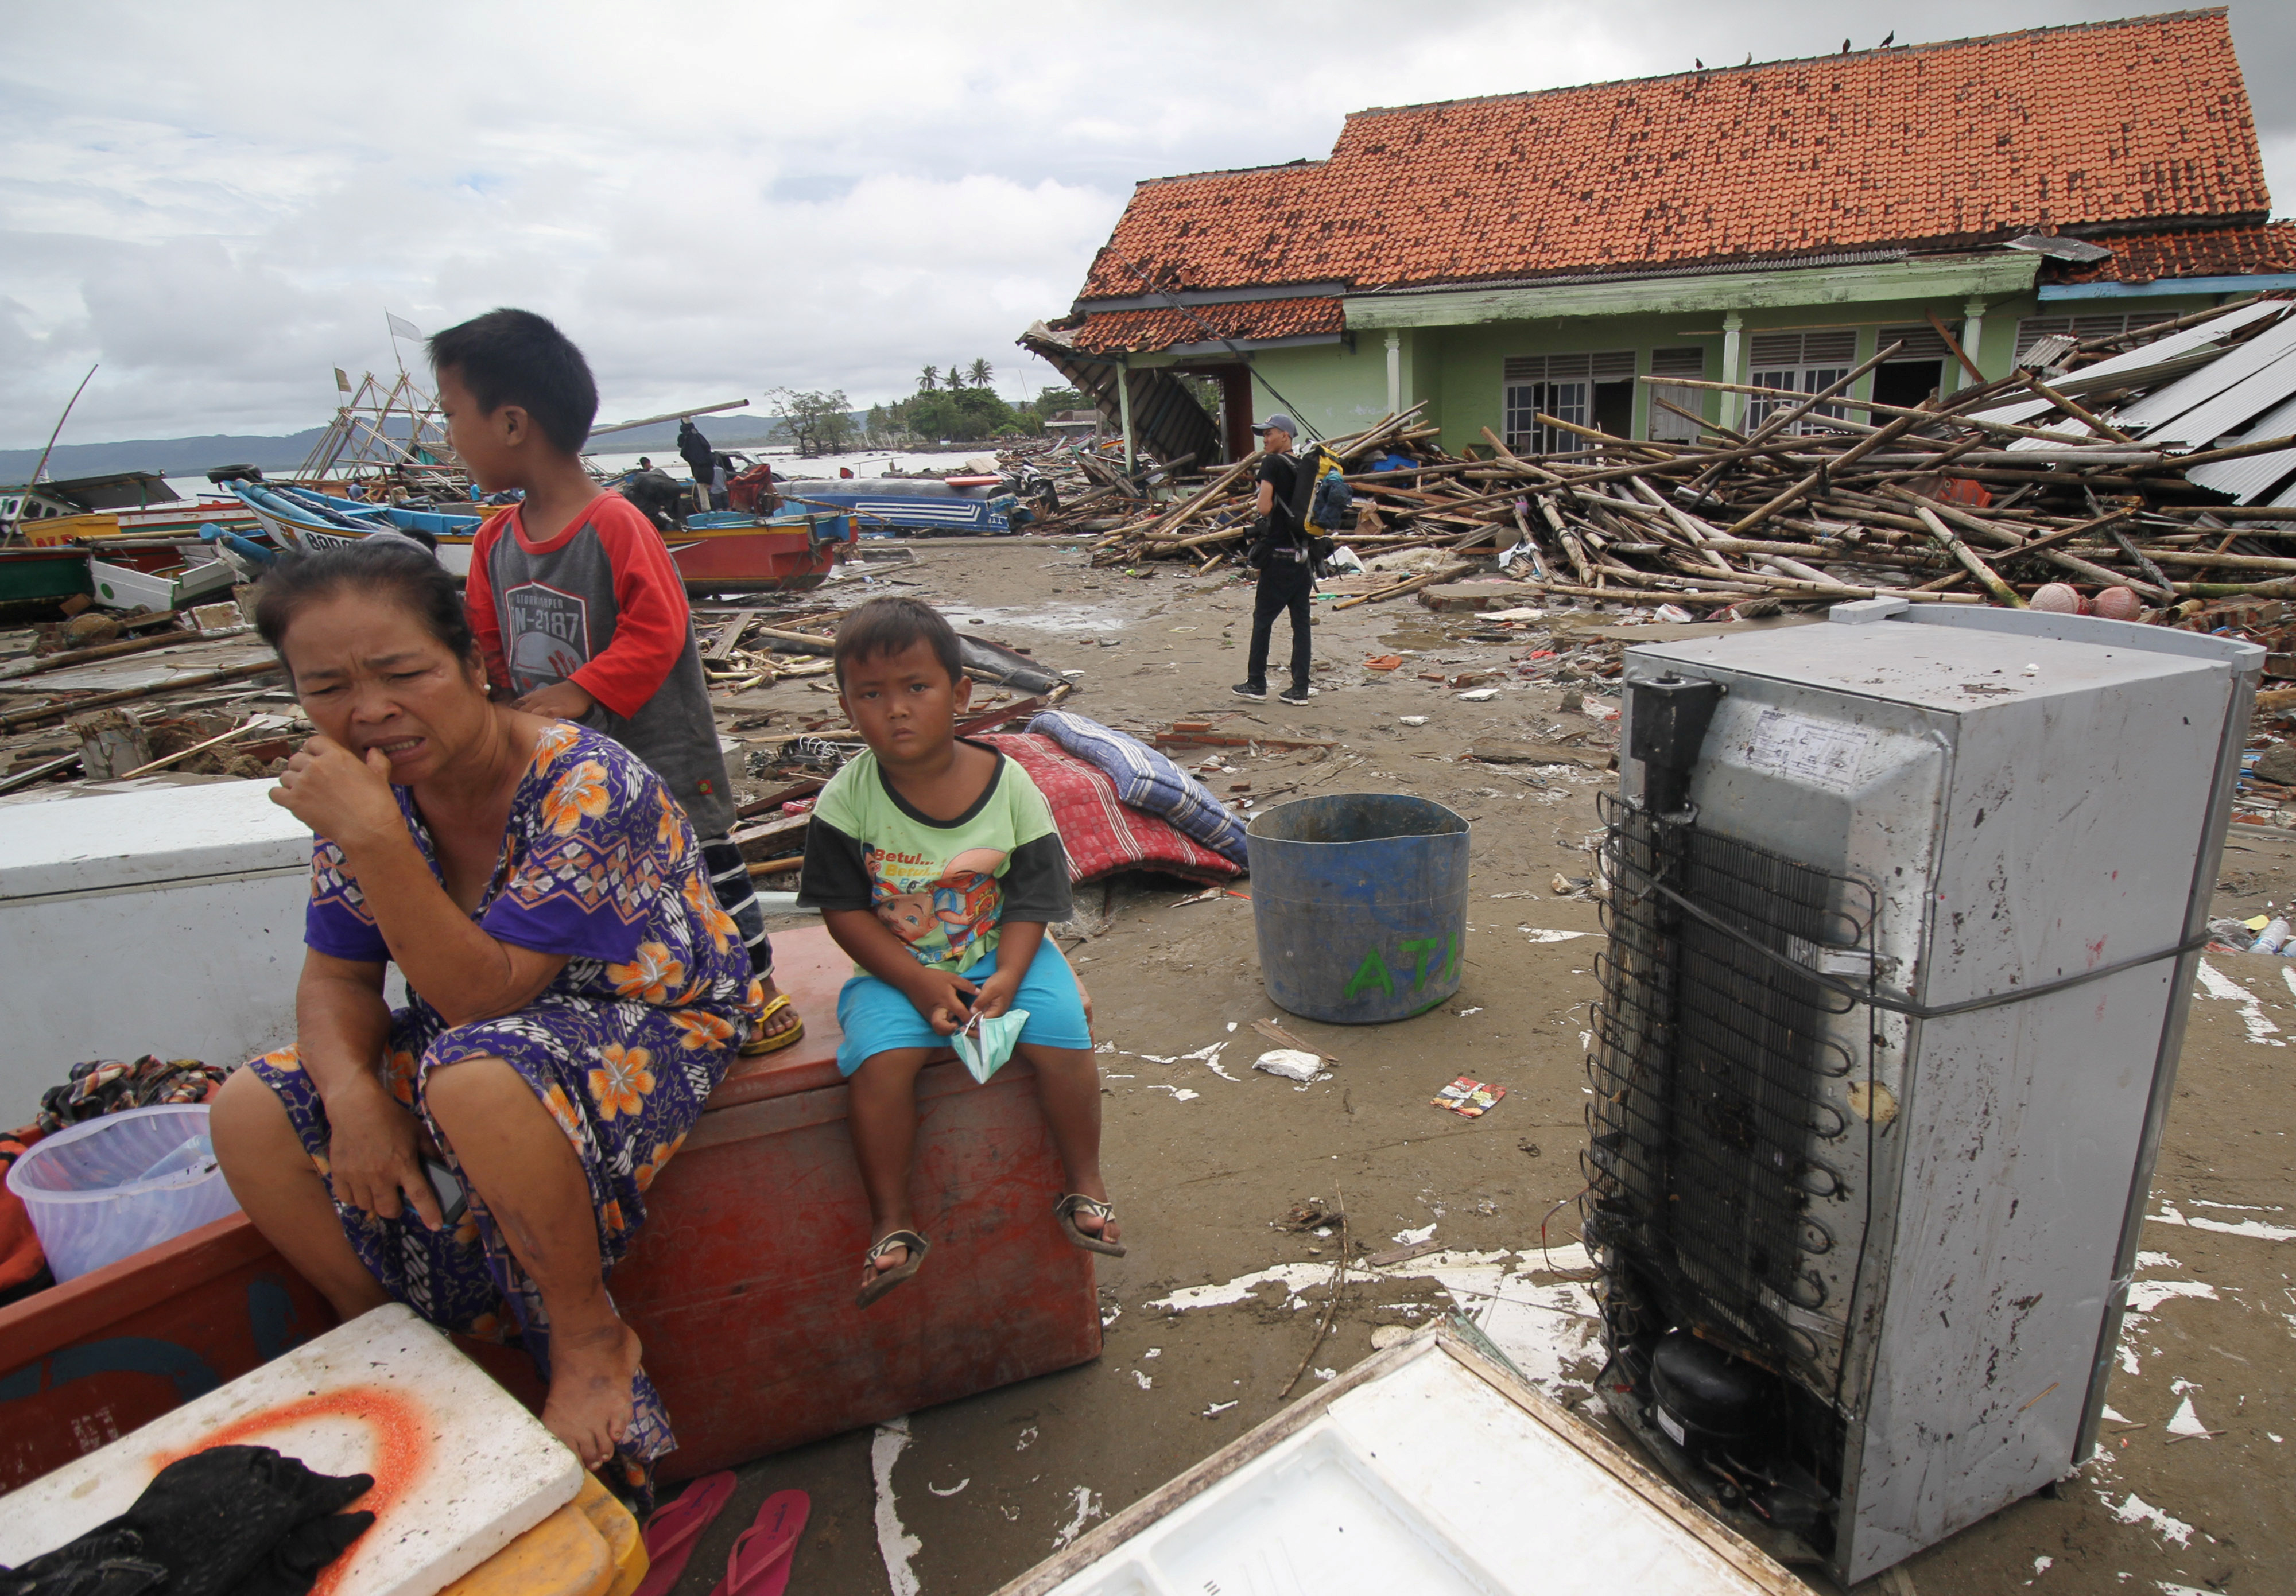 Local residents sit among their items after a tsunami hit at Sumur district in Pandeglang, Banten province, Indonesia, December 24, 2018. Antara Foto/Aurora Rinjani/ via REUTERS